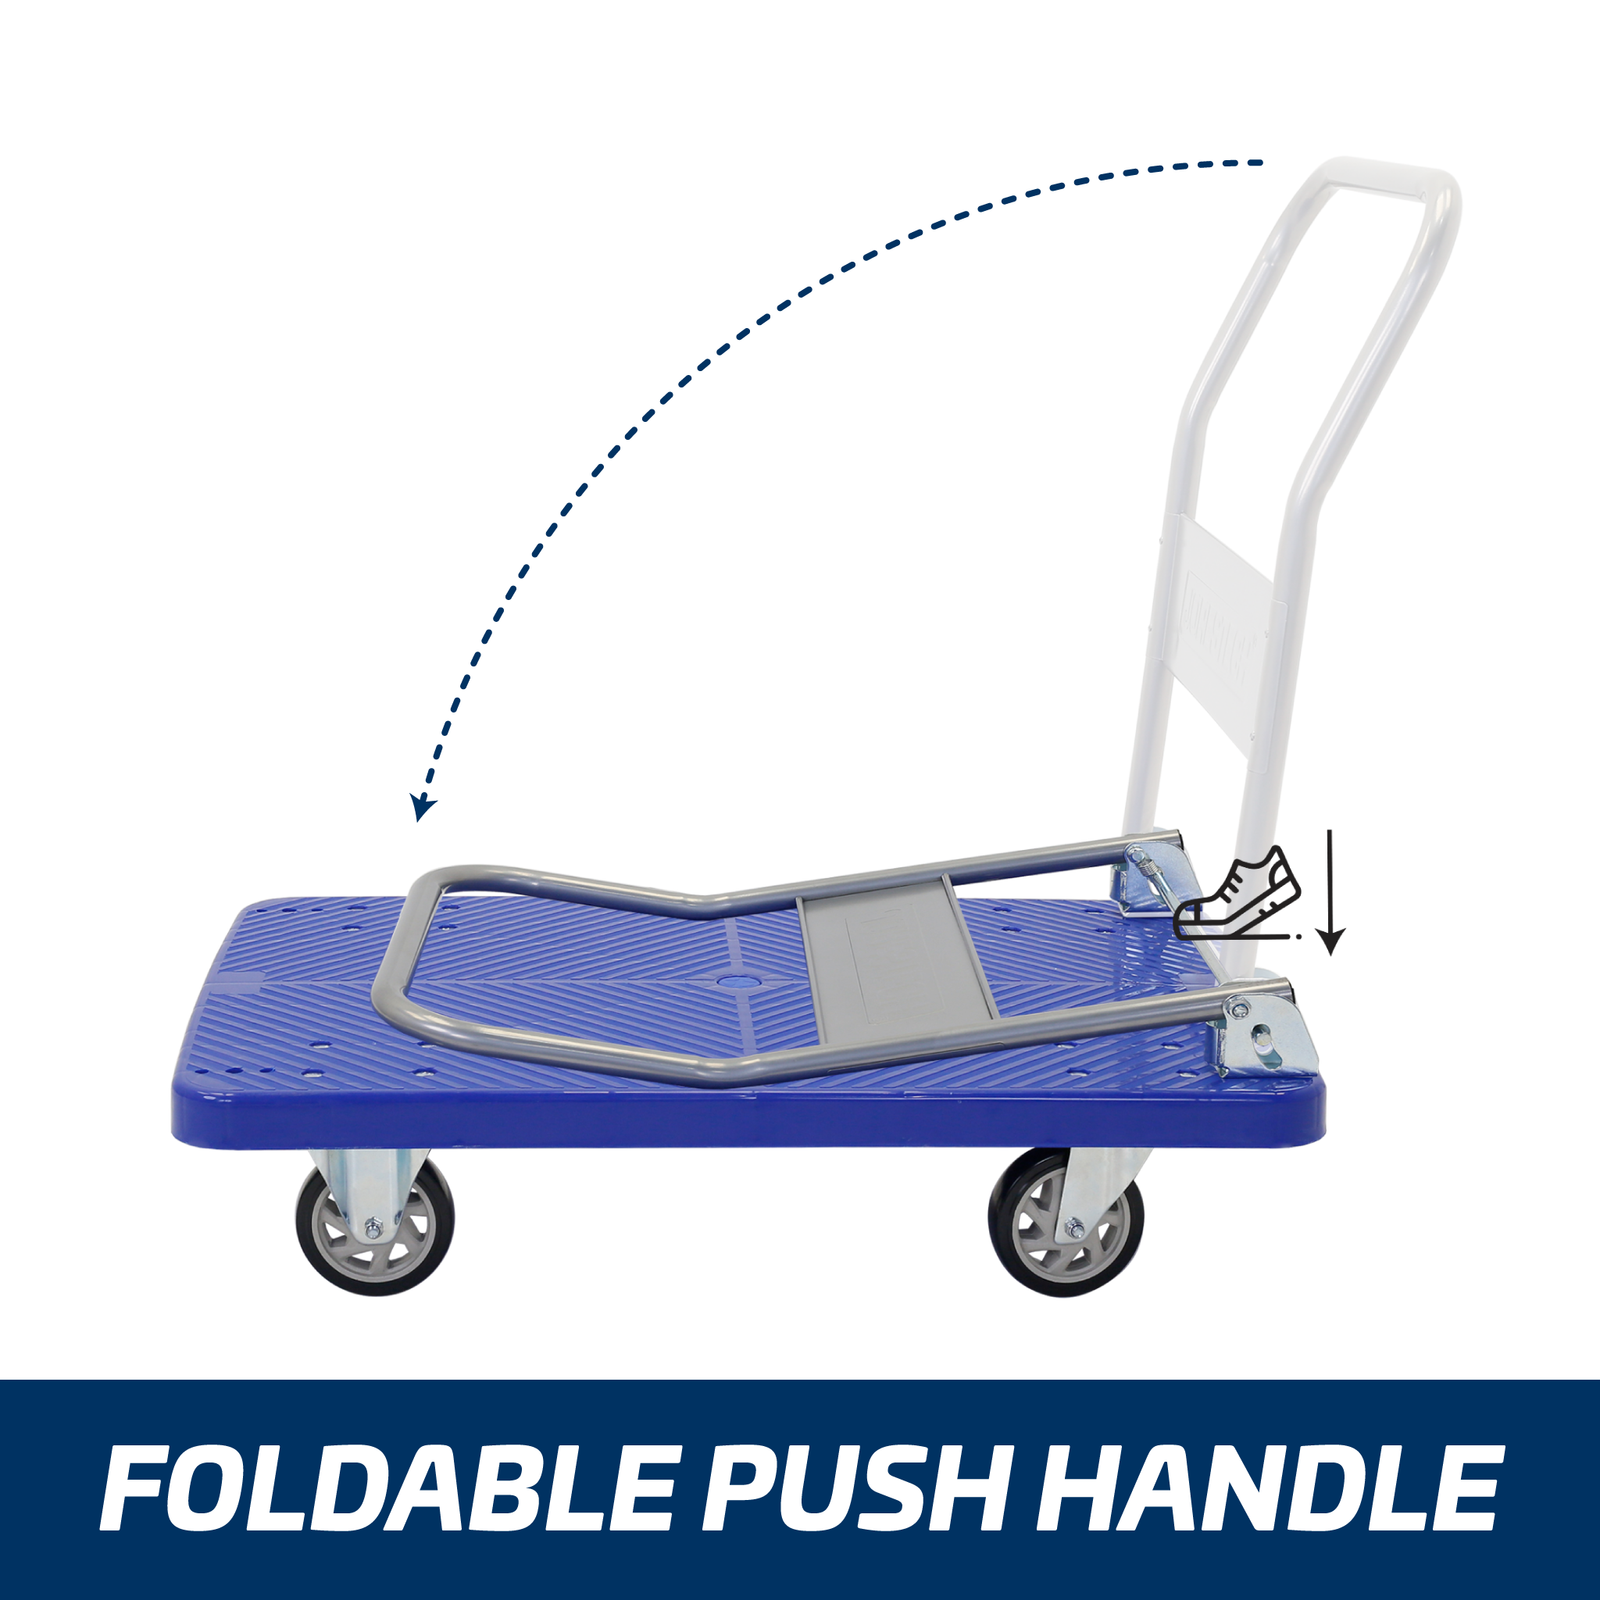 Side view of the Jorestech foldable platform cart showing where to step to make handle collapse for easy storage and transportation